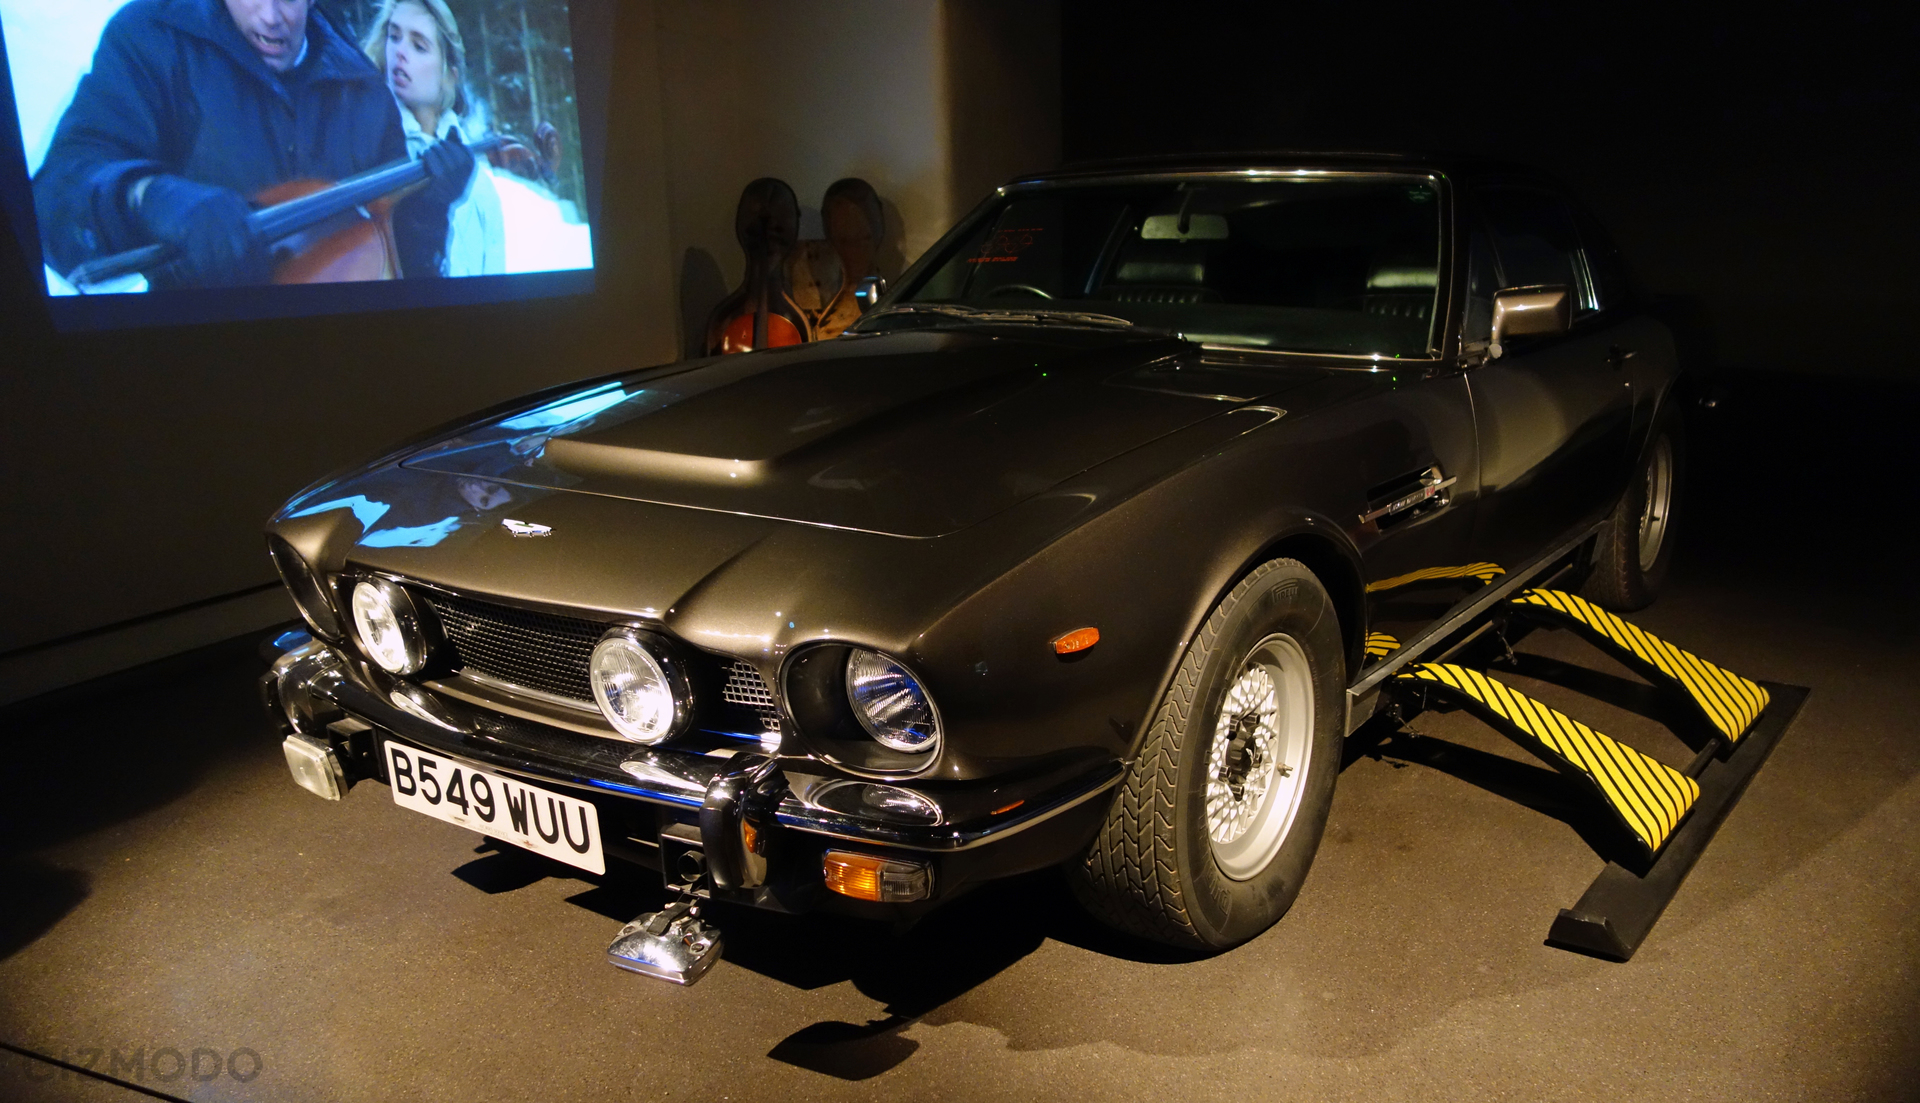 My Afternoon With James Bond’s Amazing Spy Vehicles